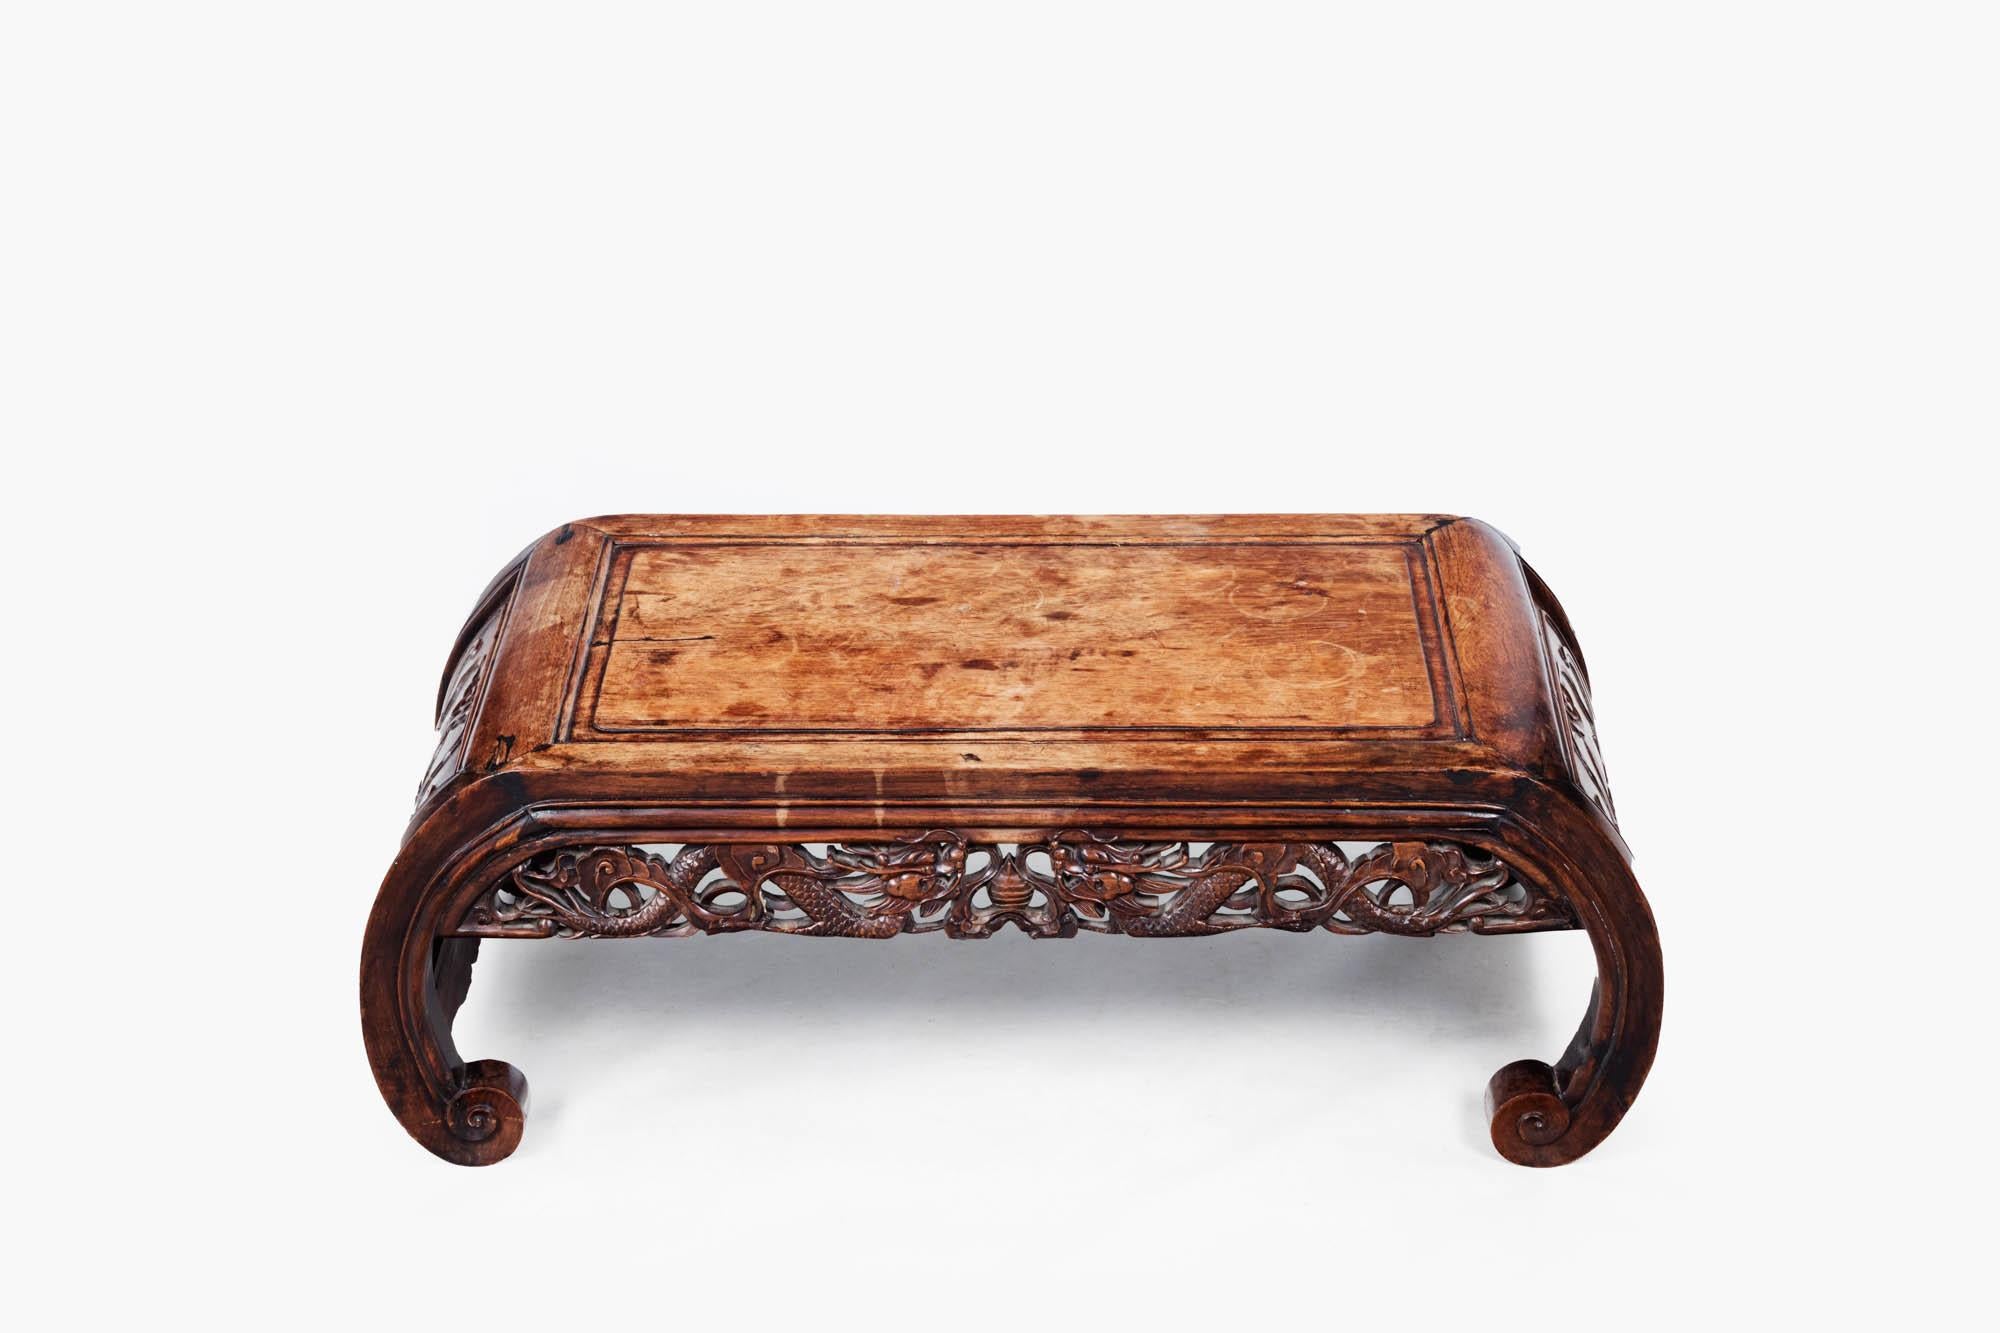 Early 19th Century Qing Dynasty Period Chinese Hardwood Low Kang Table In Excellent Condition For Sale In Dublin 8, IE